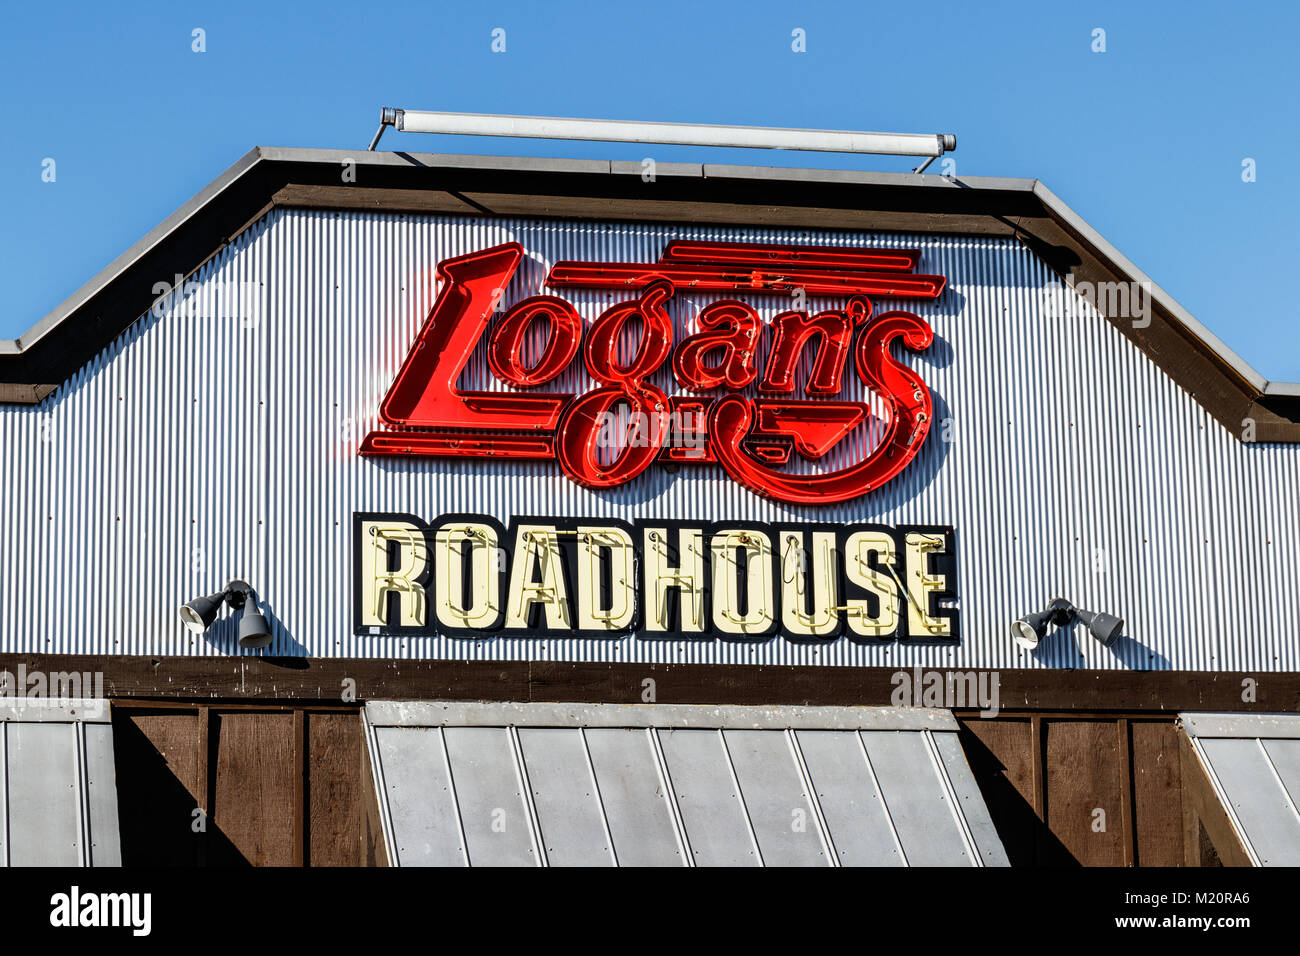 Lafayette - Circa February 2018: Logan's Roadhouse Restaurant and Signage. Logan's Roadhouse is a wholly owned subsidiary of Kelso & Company II Stock Photo